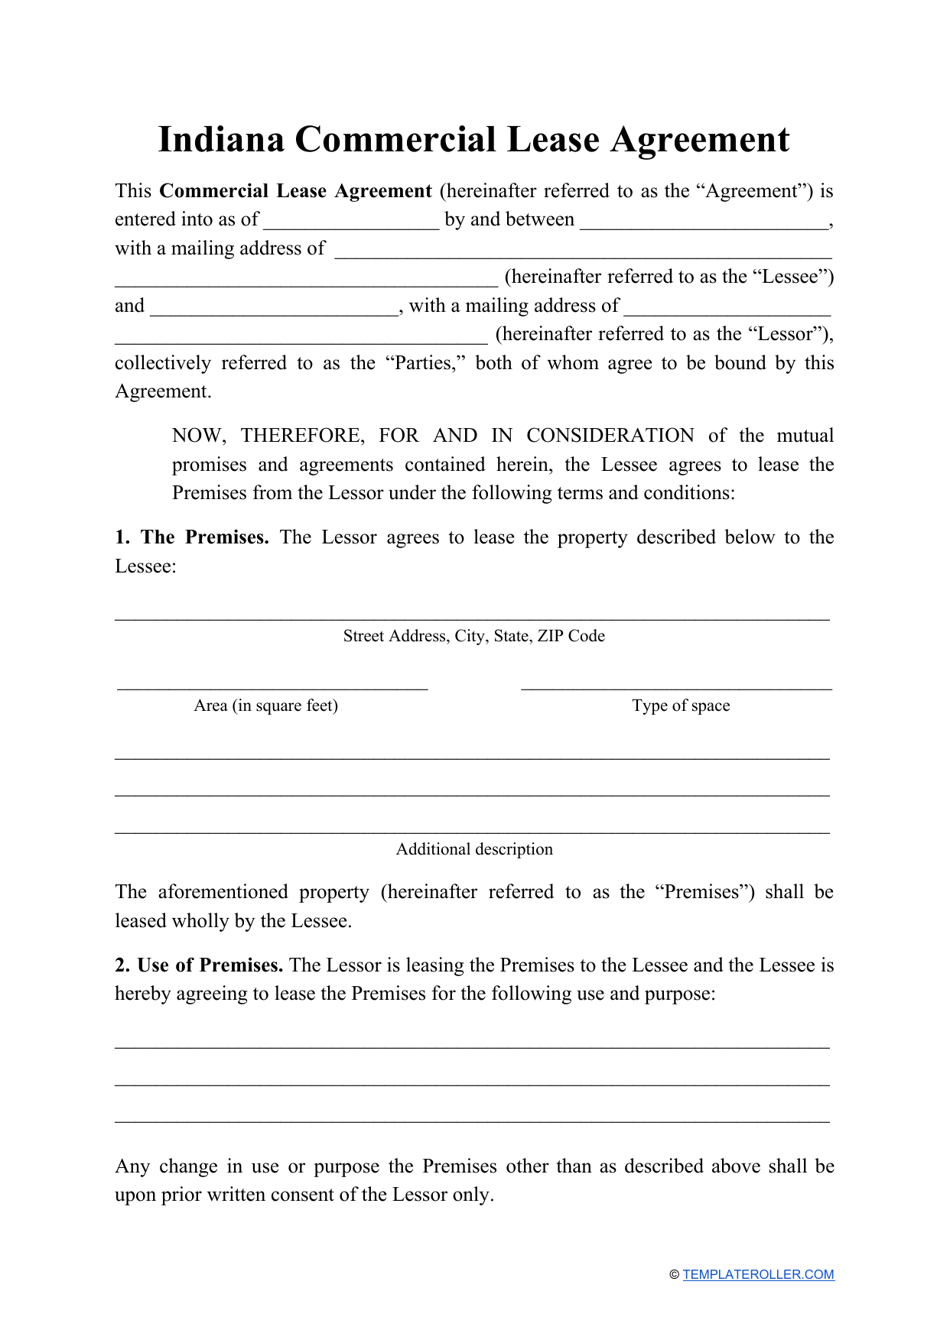 Commercial Lease Agreement Template - Indiana, Page 1